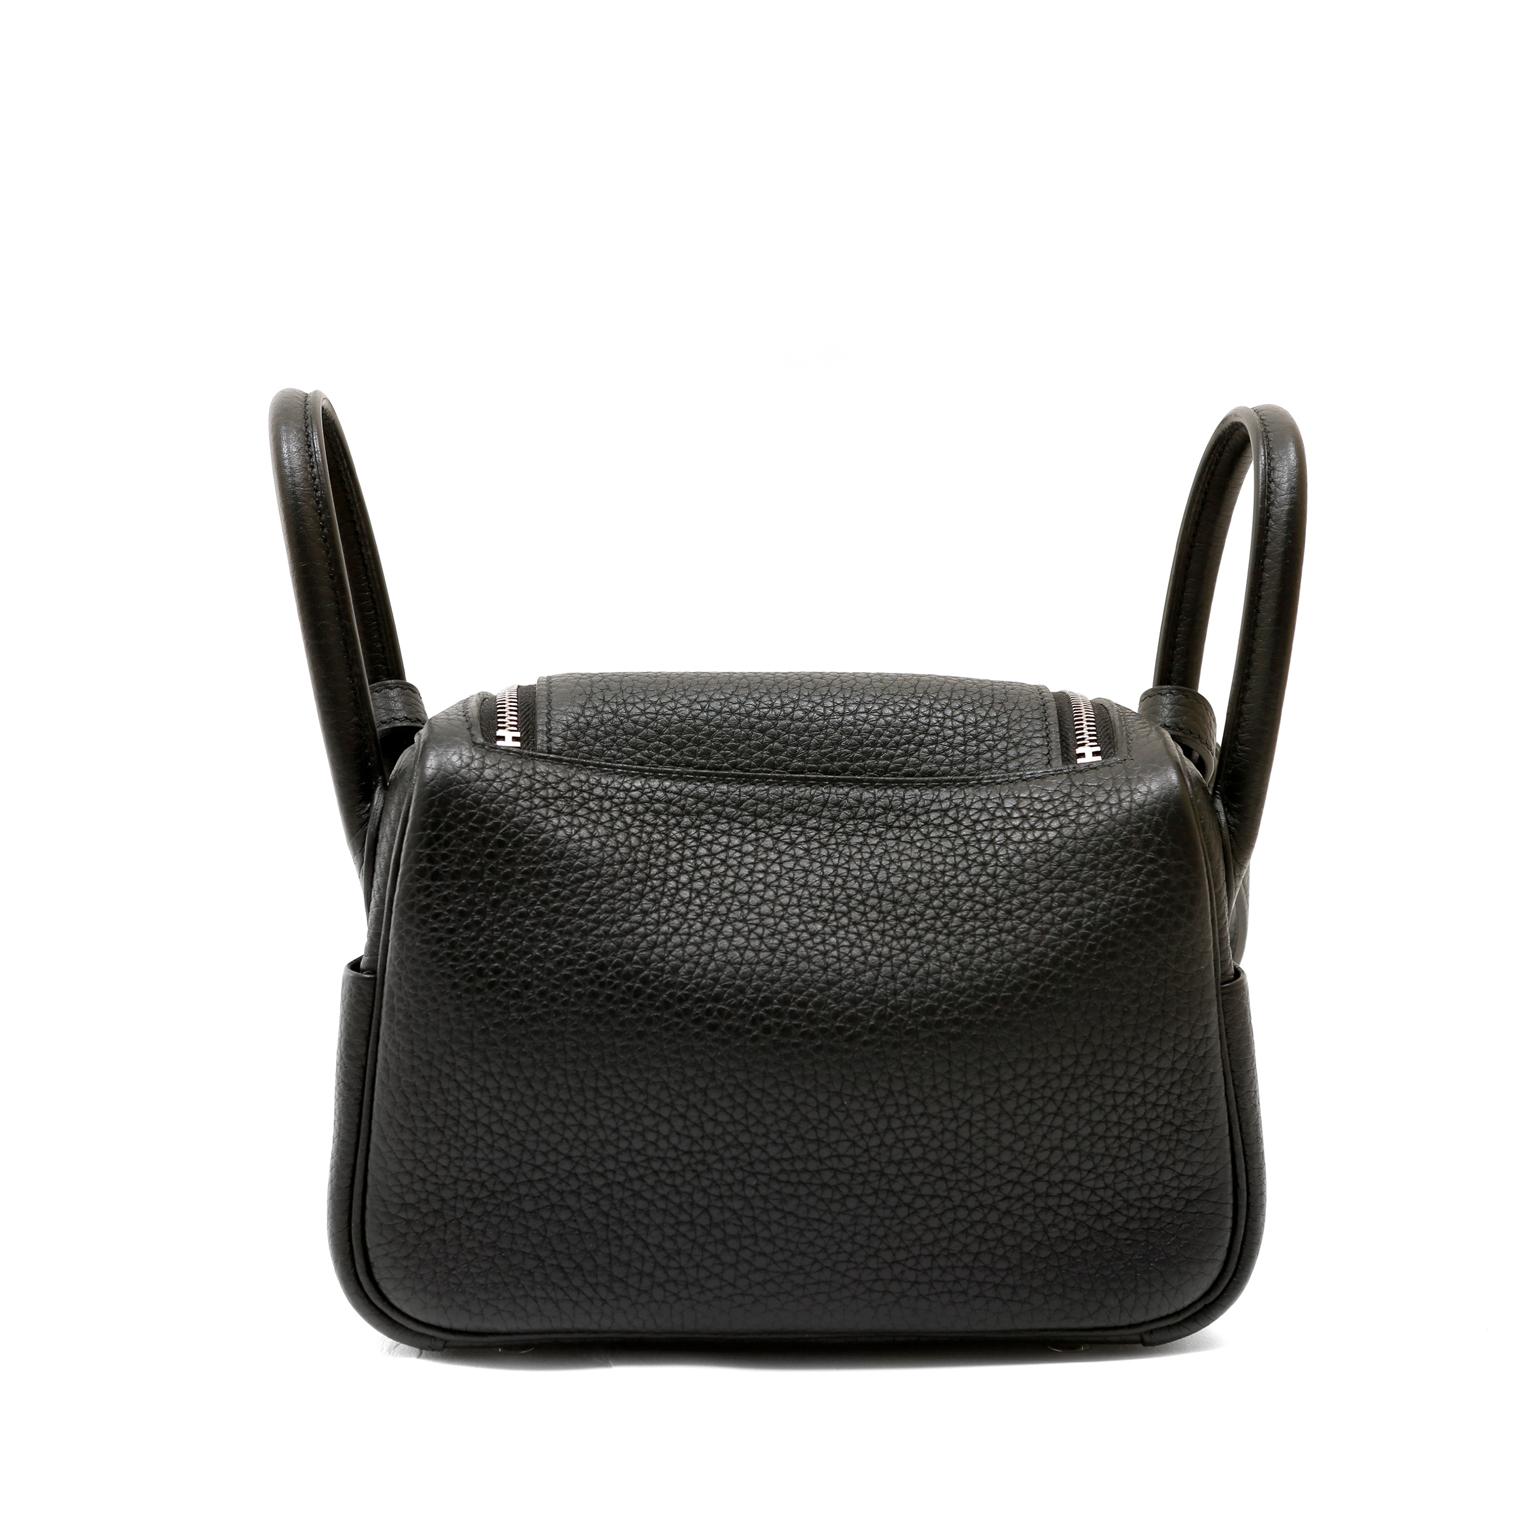 This authentic Hermès Black Clemence Mini Lindy is brand new with the protective plastic on the hardware.  In very high demand, the Mini Lindy is an instant classic in black leather with palladium hardware.
Double handles with a long cross body